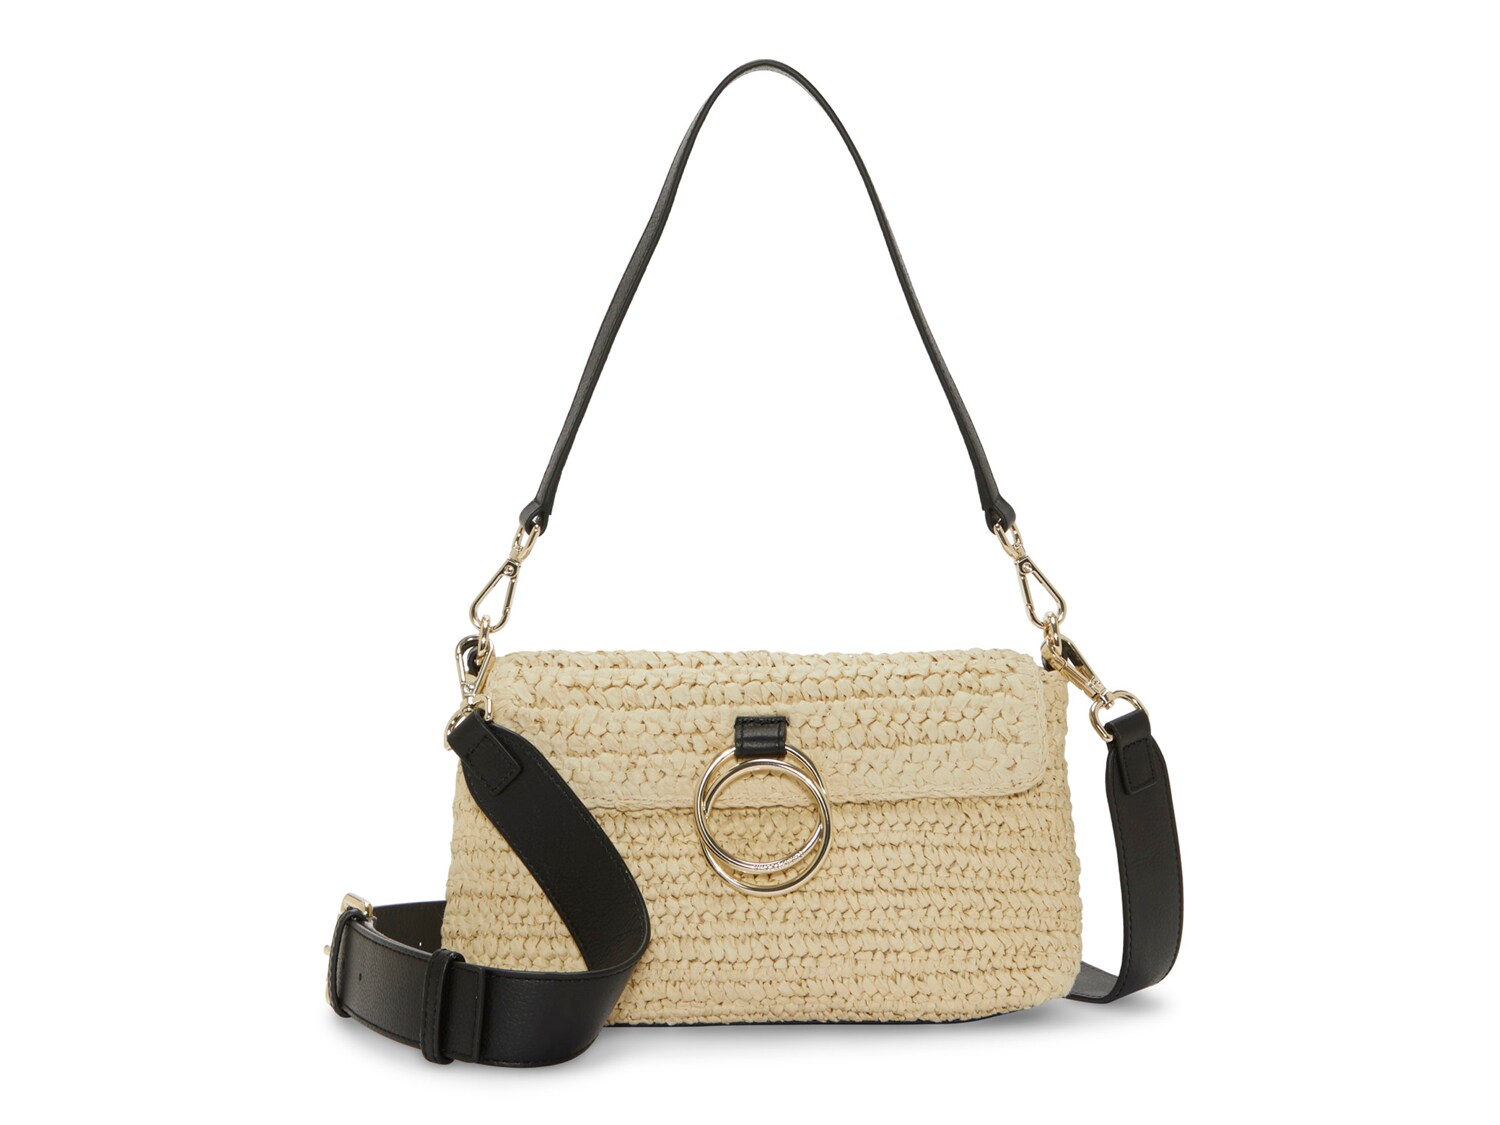 Vince Camuto Livy Crossbody Bag - Free Shipping | DSW